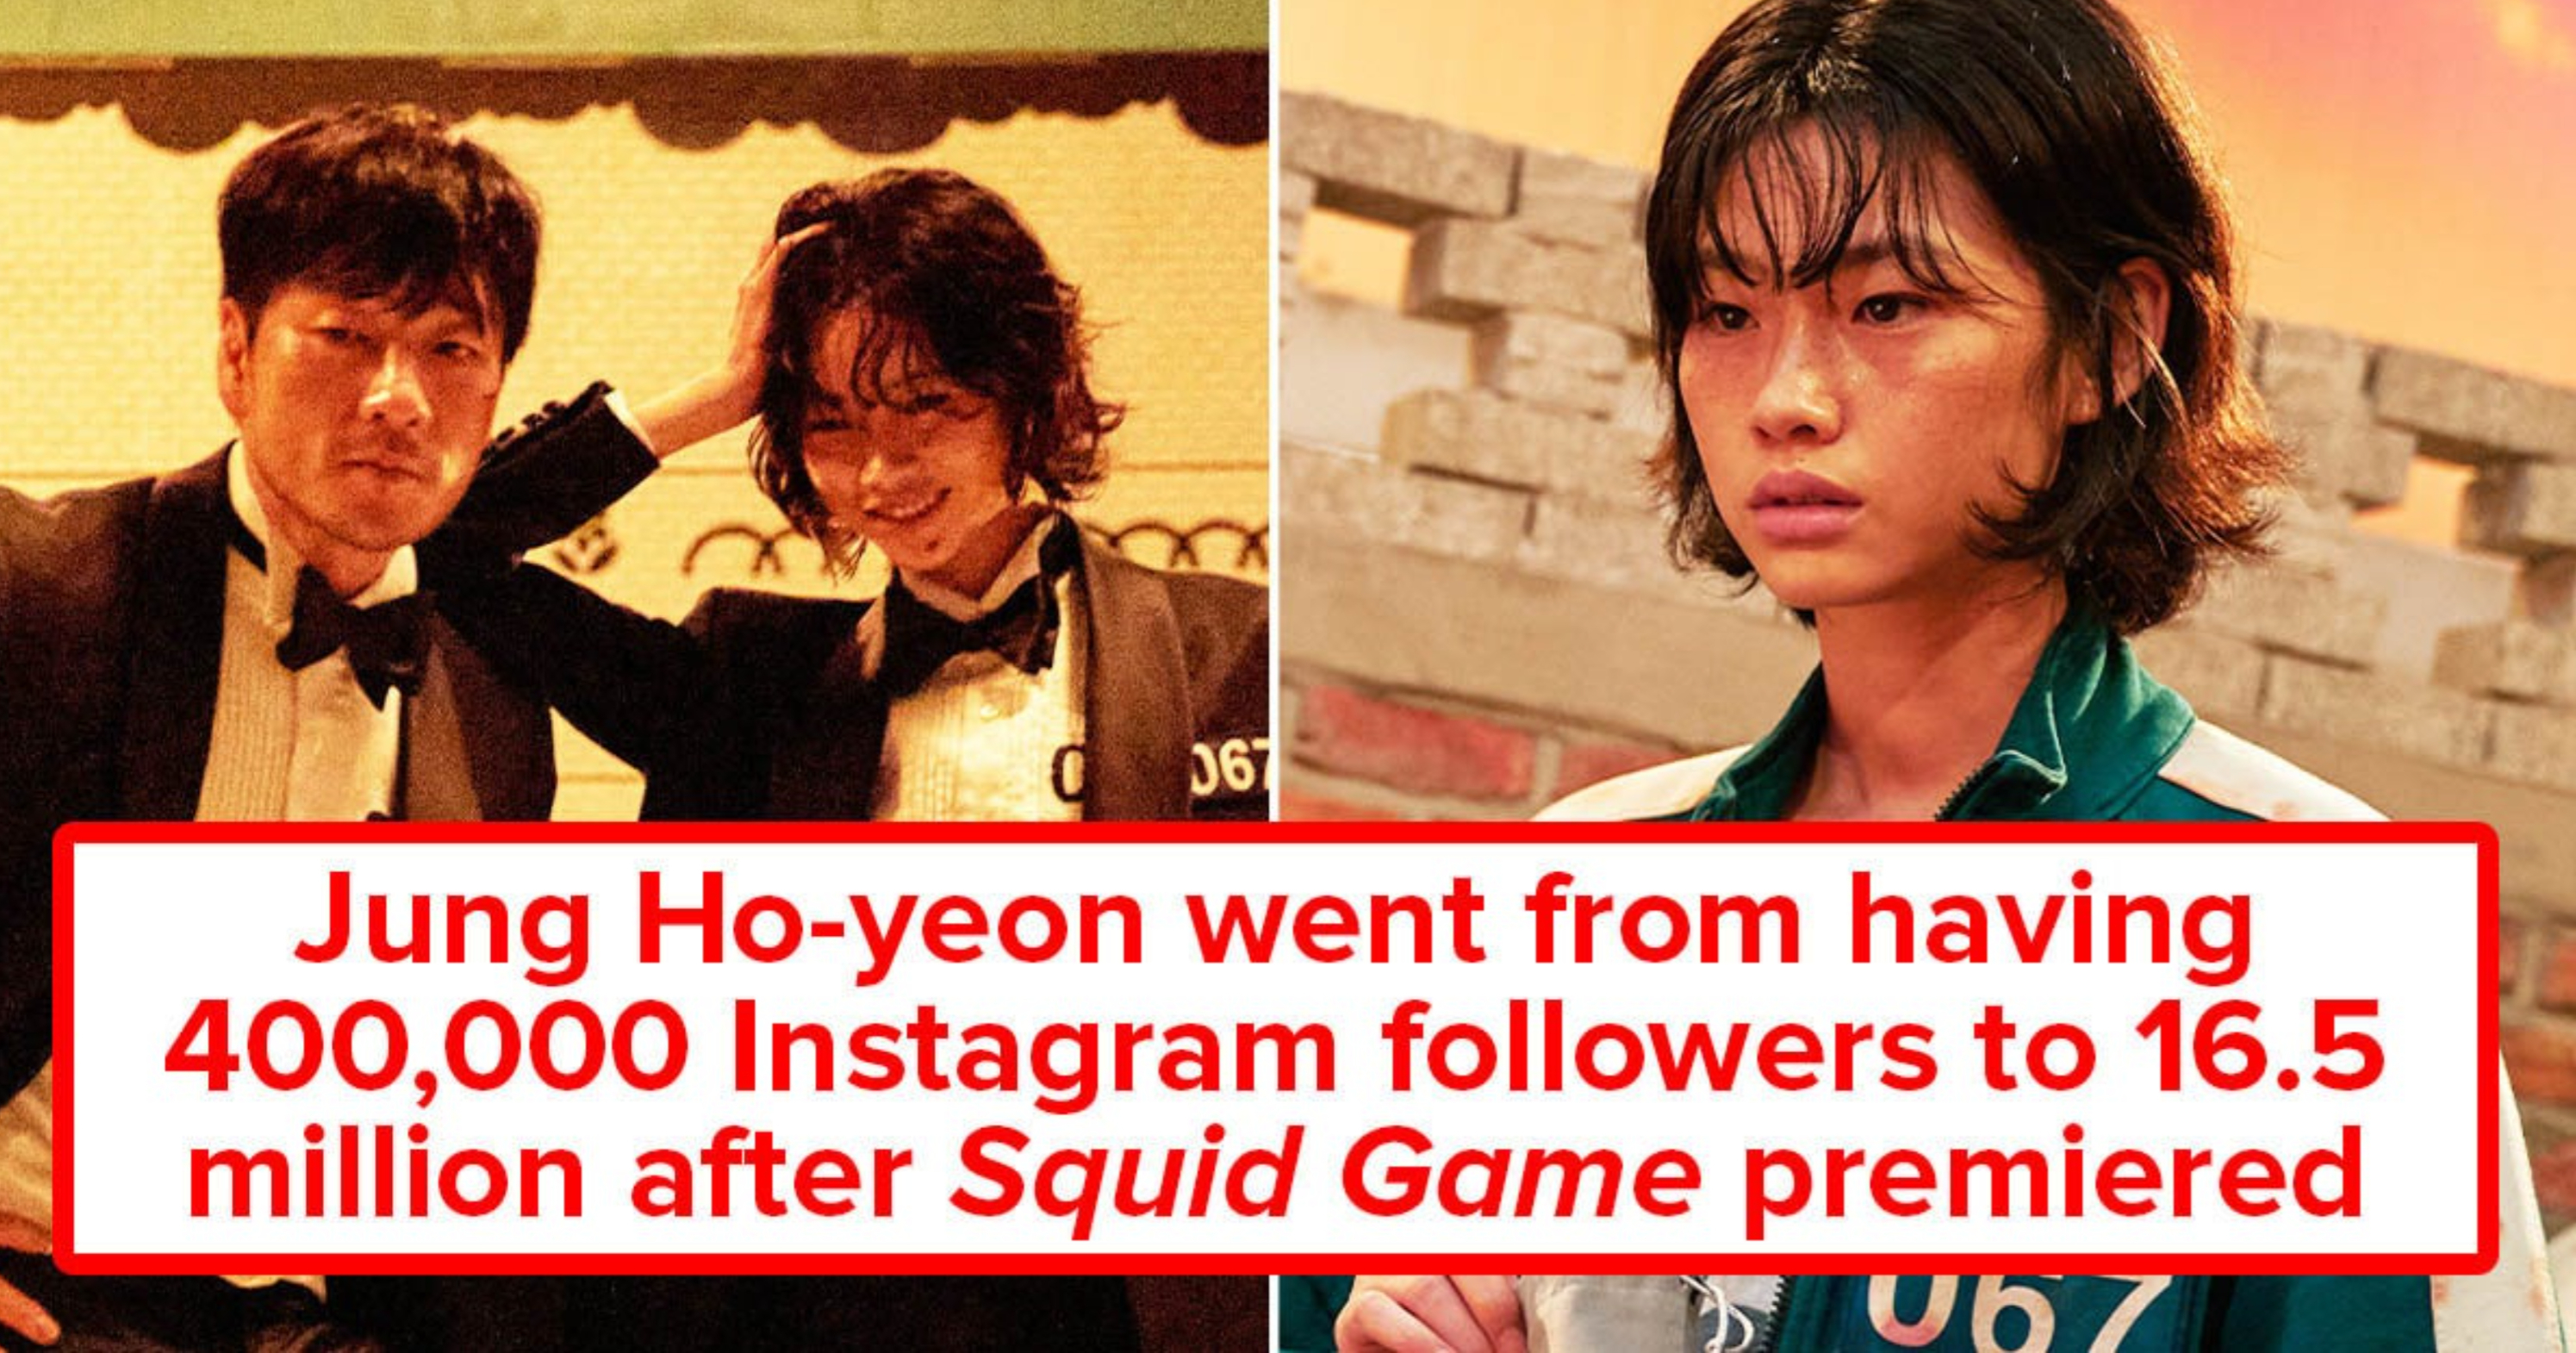 Player 067 From 'Squid Game', Explained: Who is HoYeon Jung?